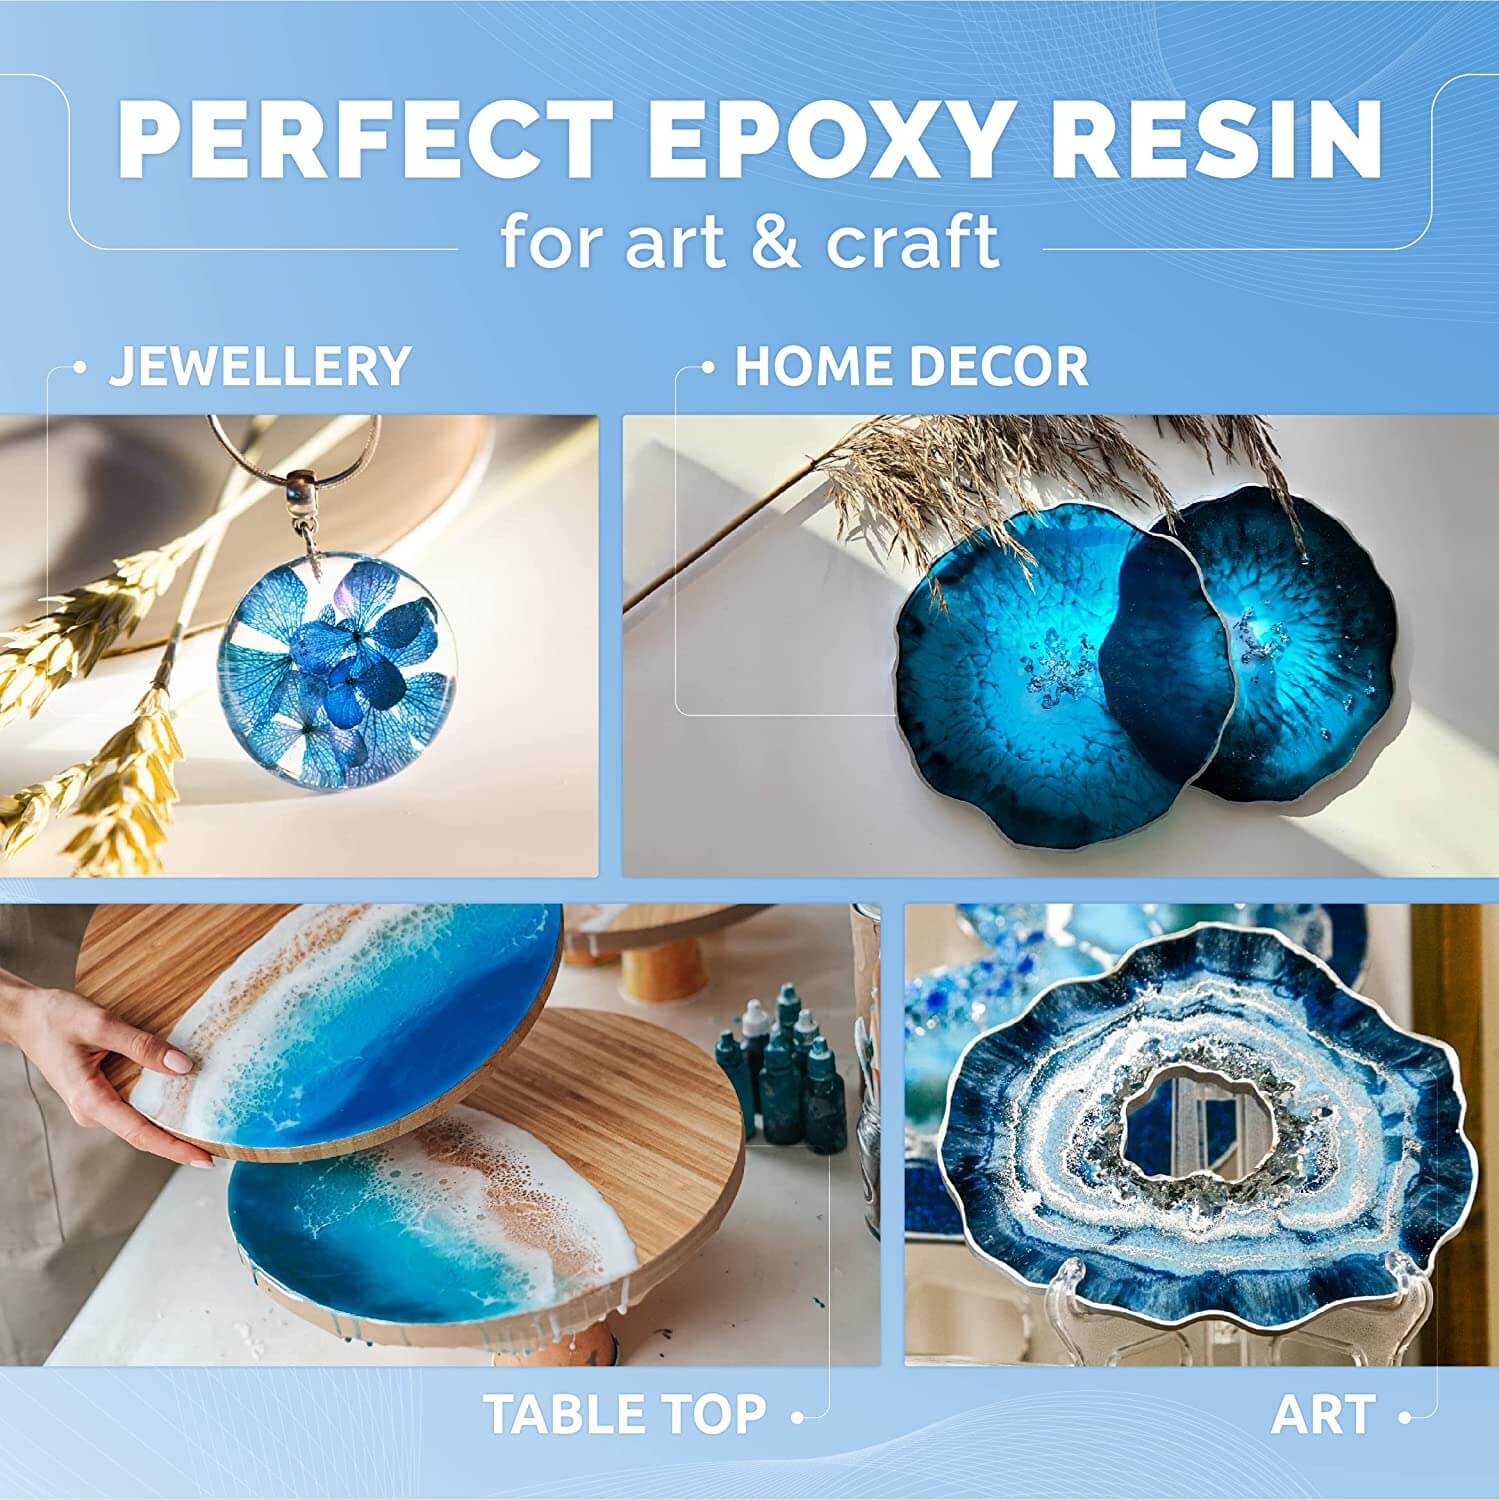 Hyliter Epoxy Resin Kit, Upgraded 1 Gallon Clear Resin Epoxy Food